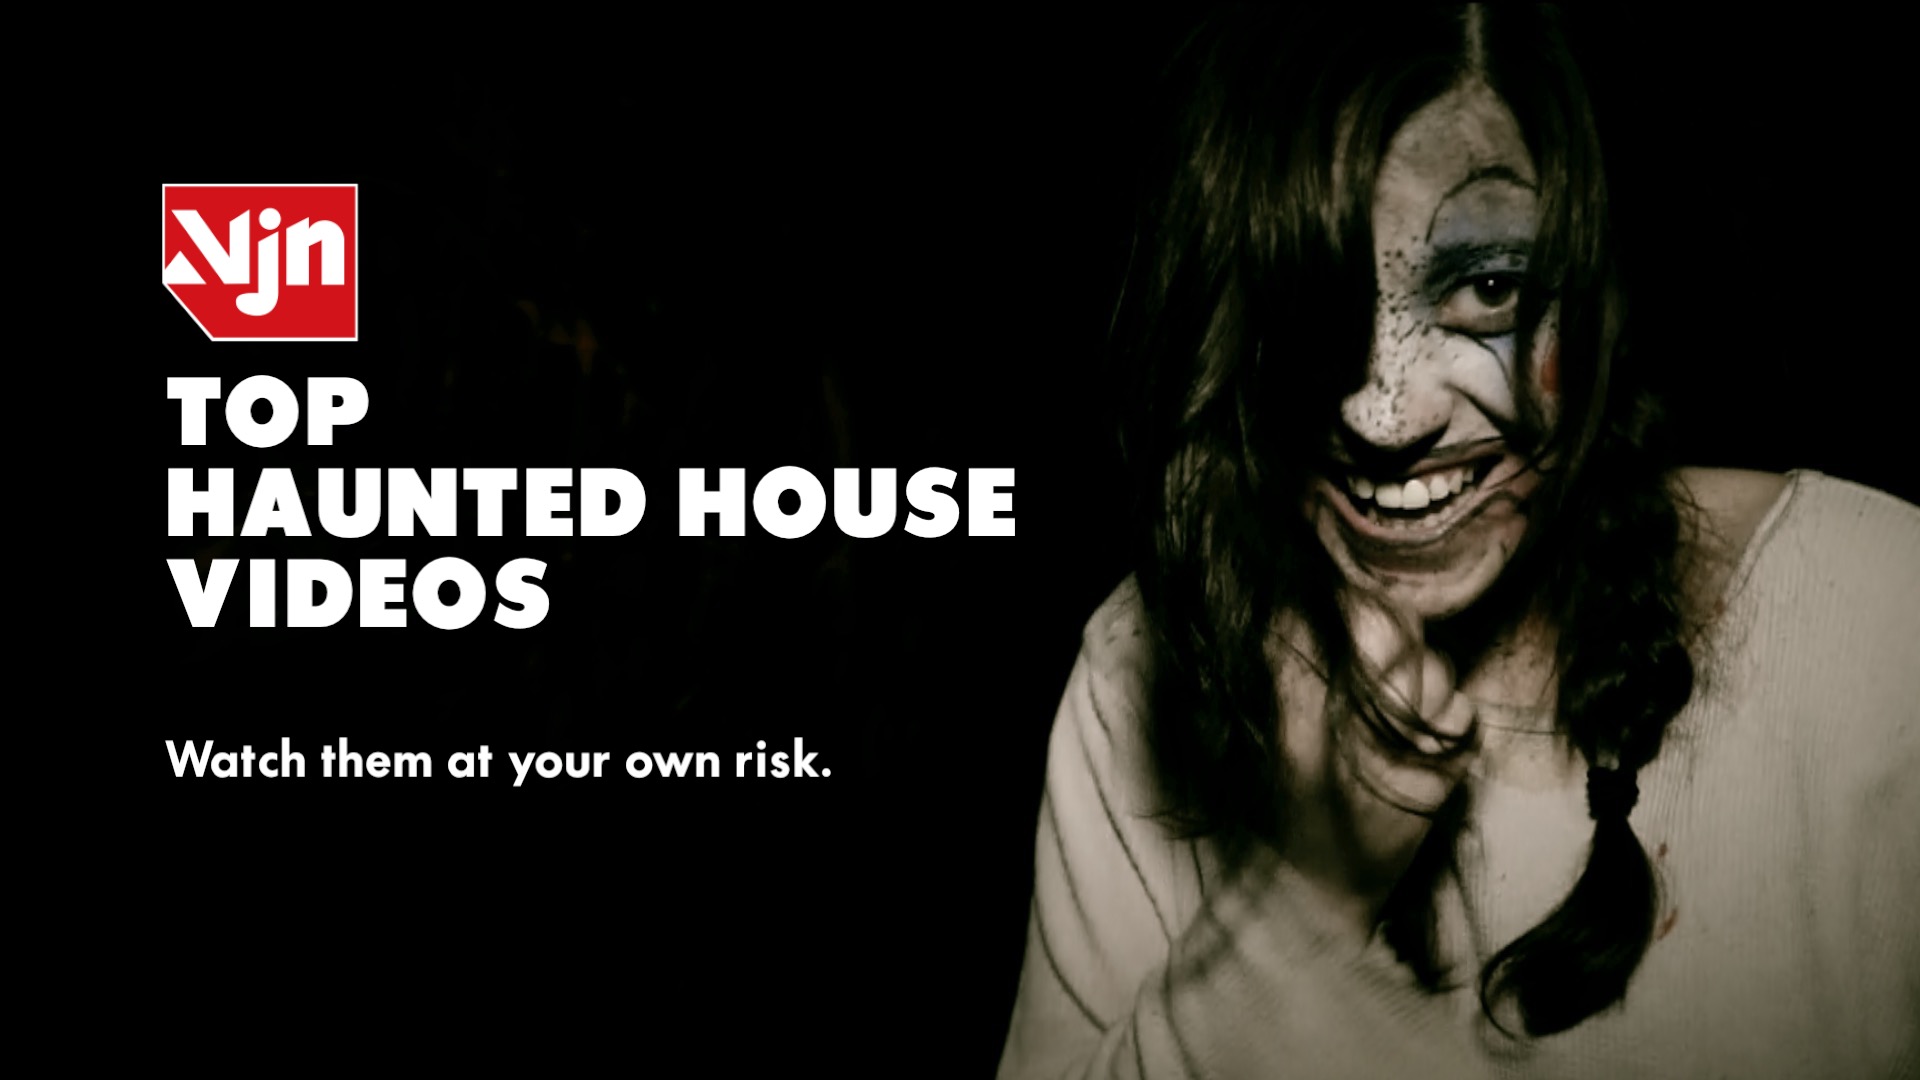 Top Haunted House Videos